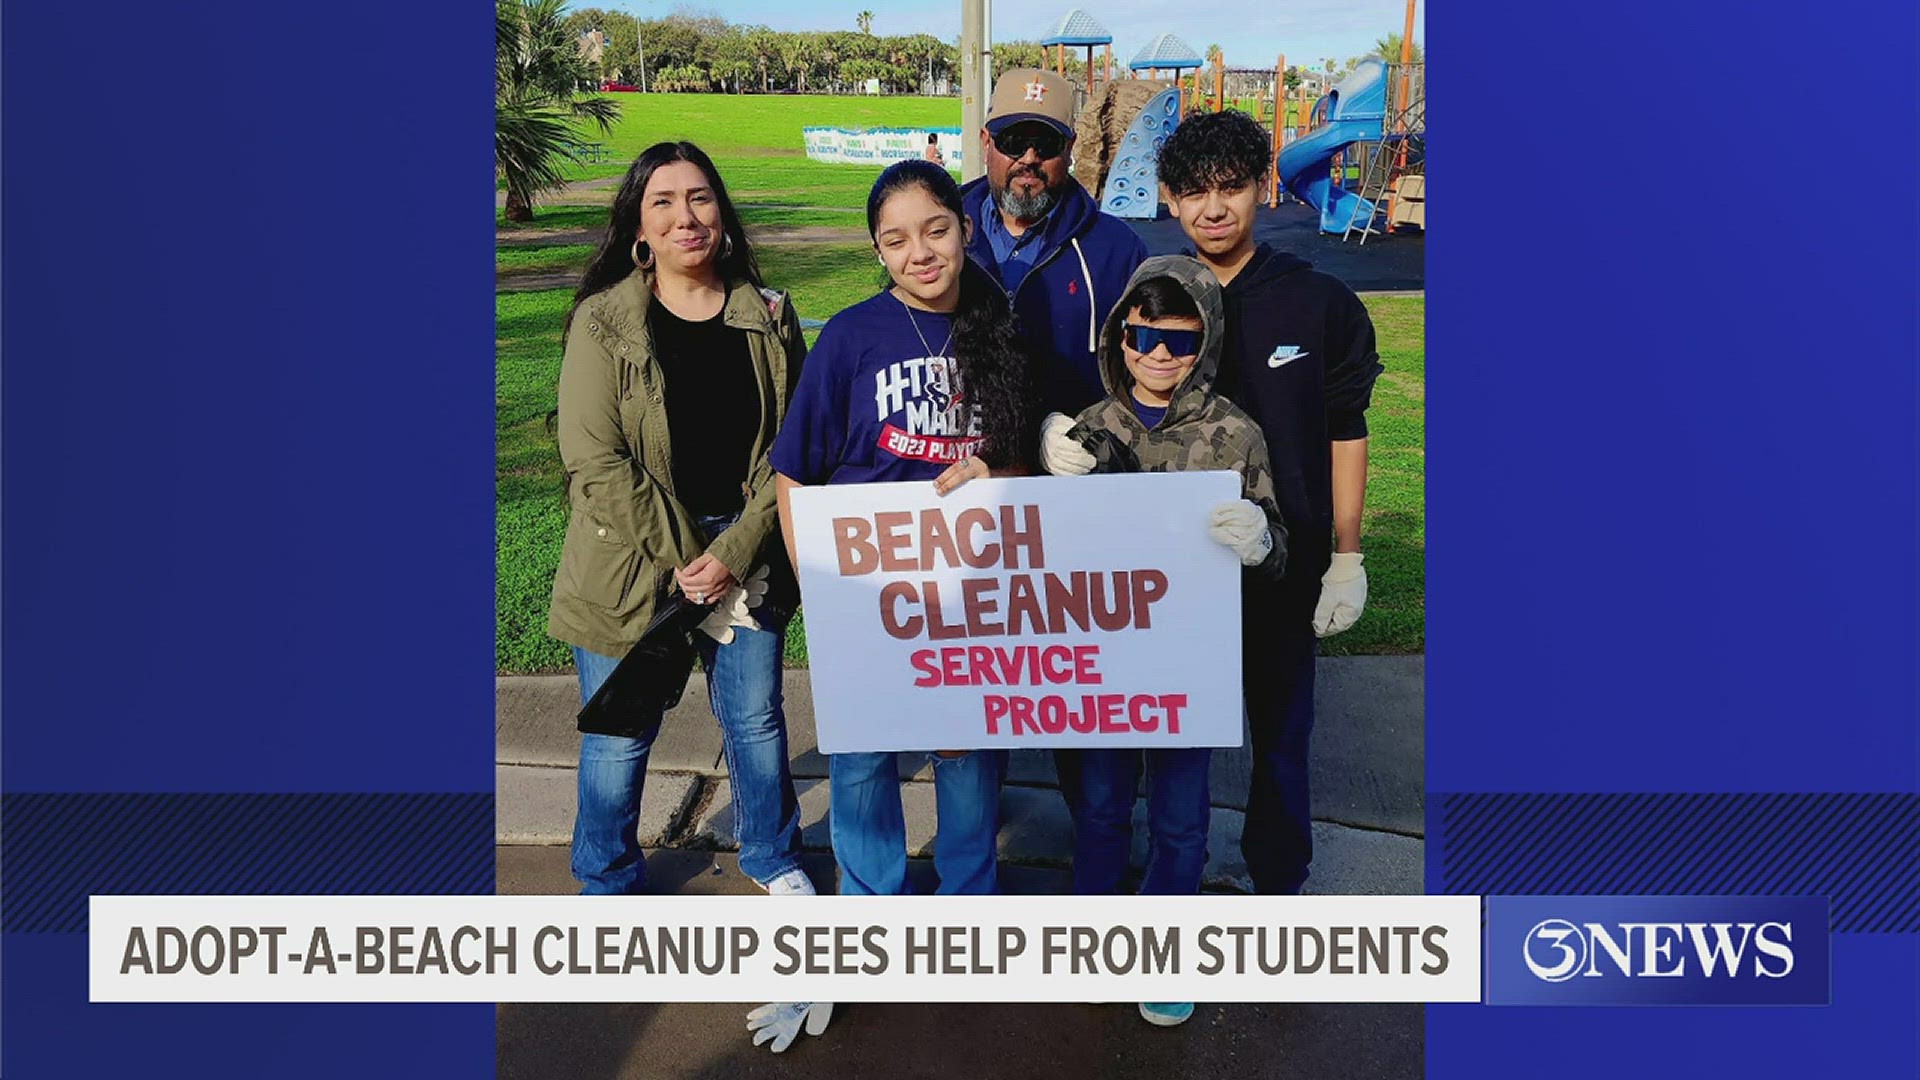 School of Science & Technology students participated in a beach cleanup event over the weekend.